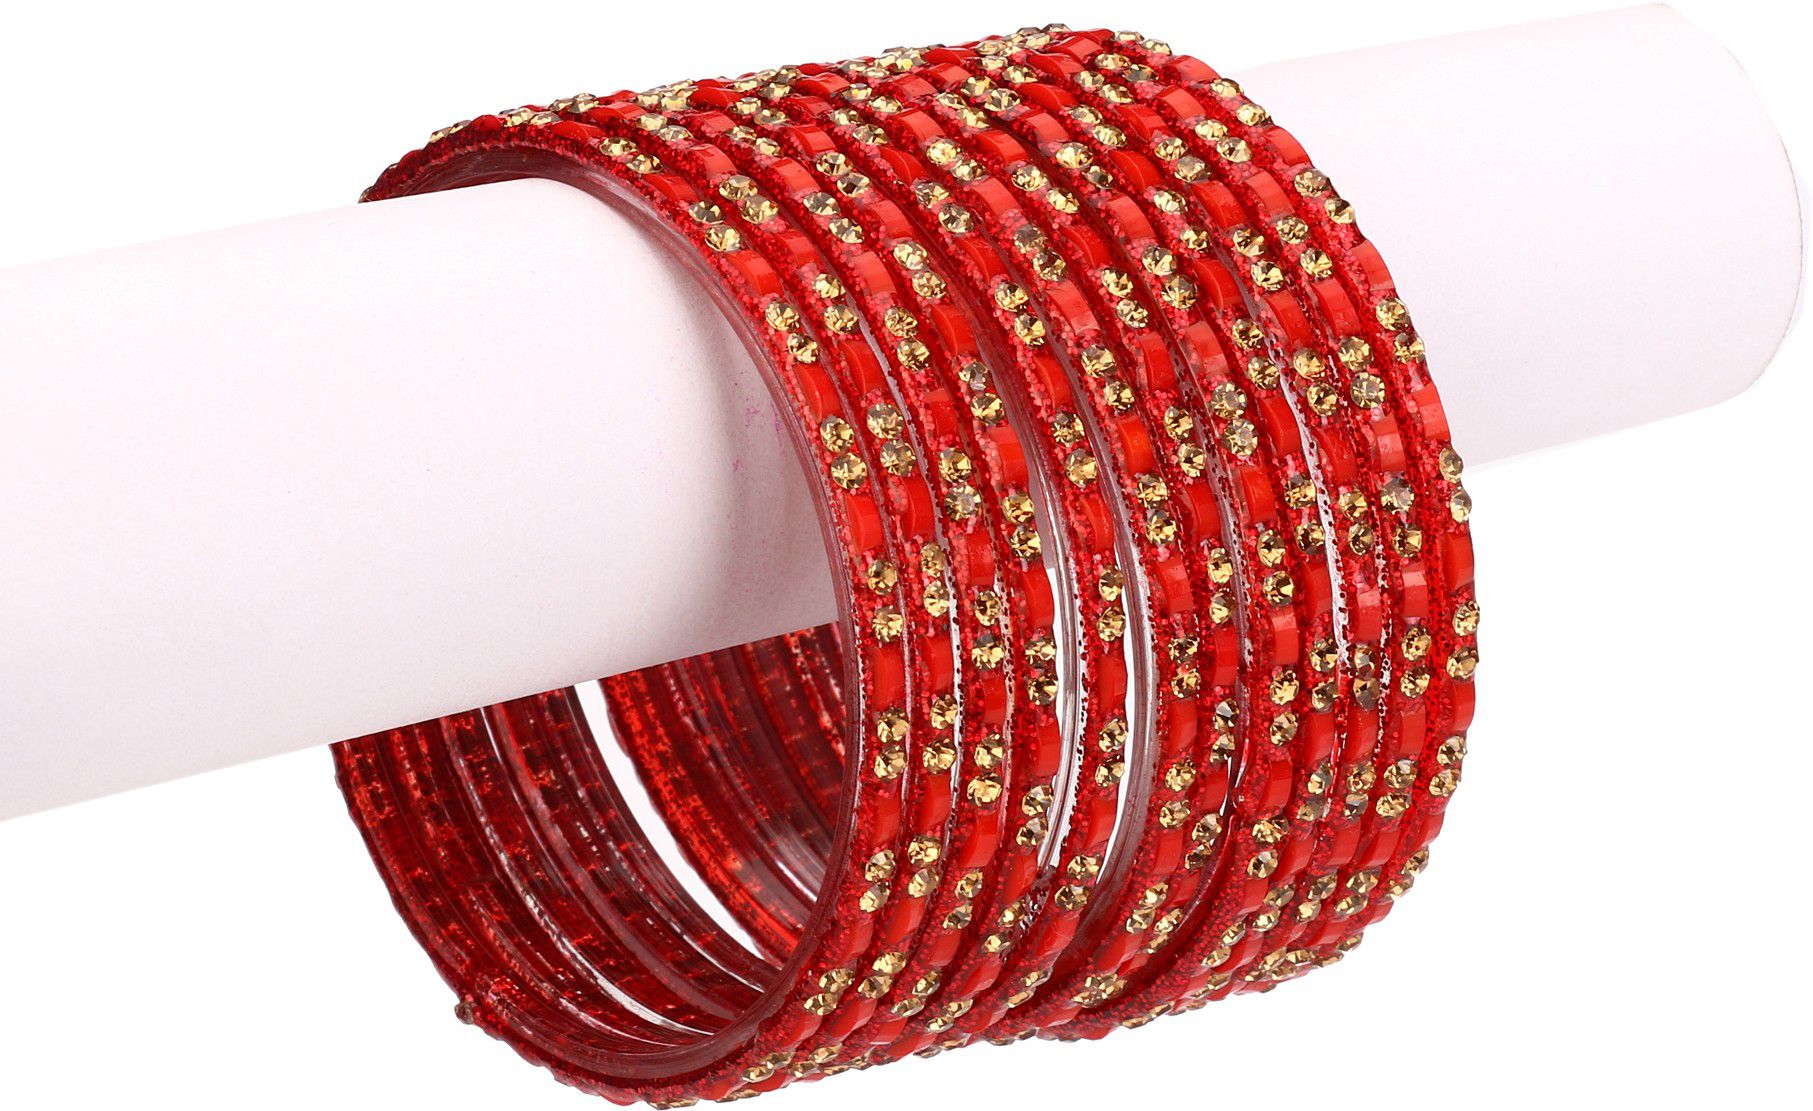     			Somil 12 Red Glass Bangle Party Set Fully Ornamented With Colorful Beads & Crystal With Safety Box-ED_2.8